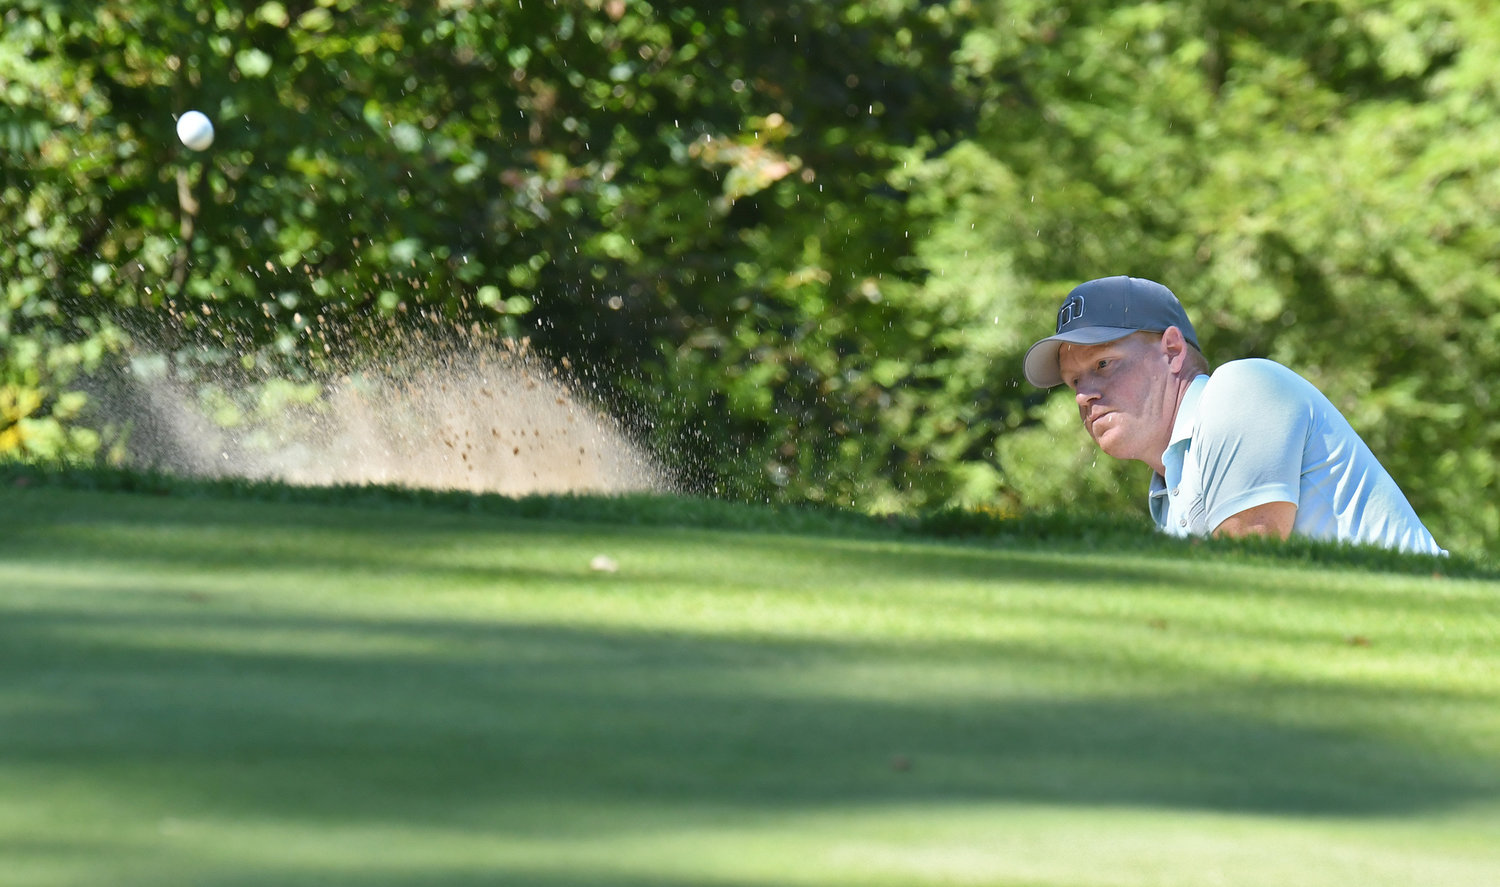 Brad Waters blasts out of the greenside sand trap on the 14th hole on Sunday afternoon at McConnellsville Country Club during the final round of the Rome City Men's Amateur Golf Championship. Waters finished 15th with a two-day score of 166.